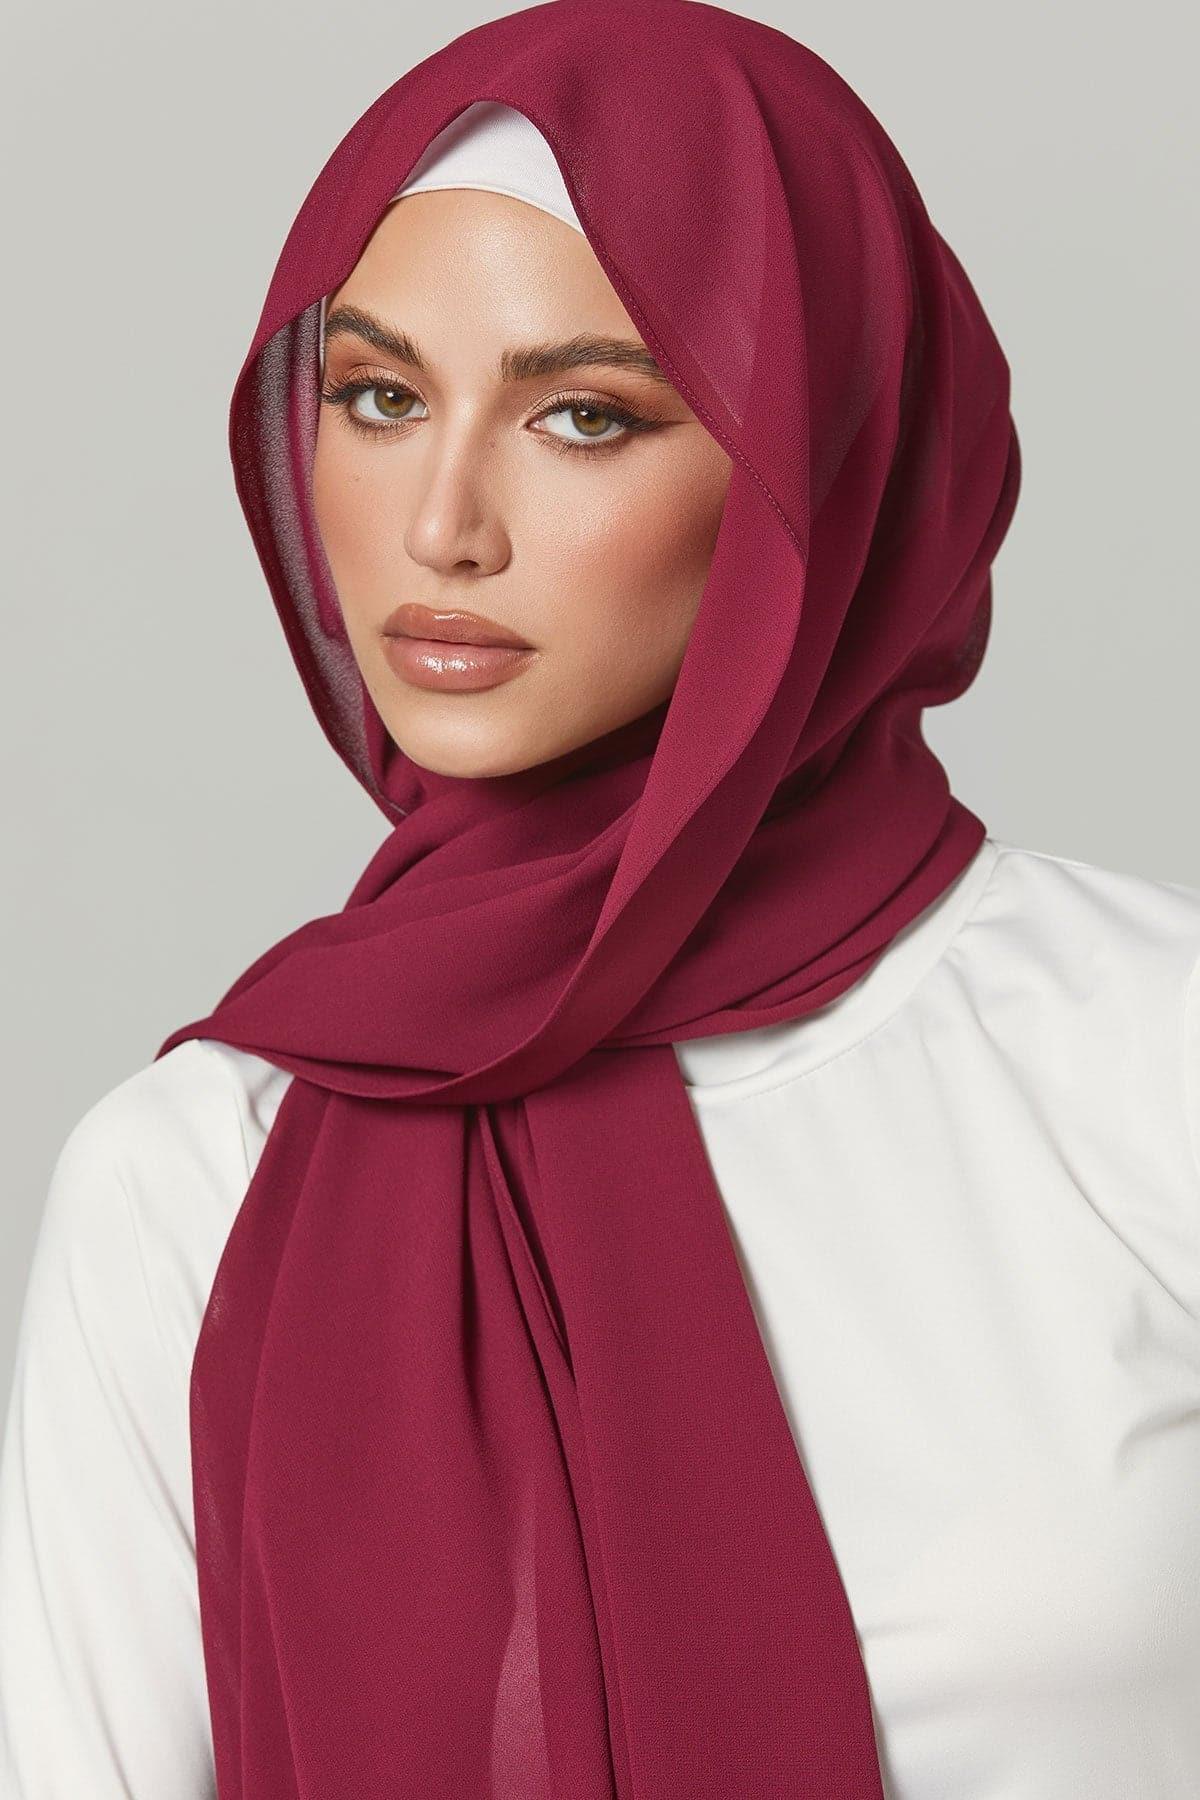 HH EXCLUSIVE // Sarah assembles the Hijab Stand. The new way to